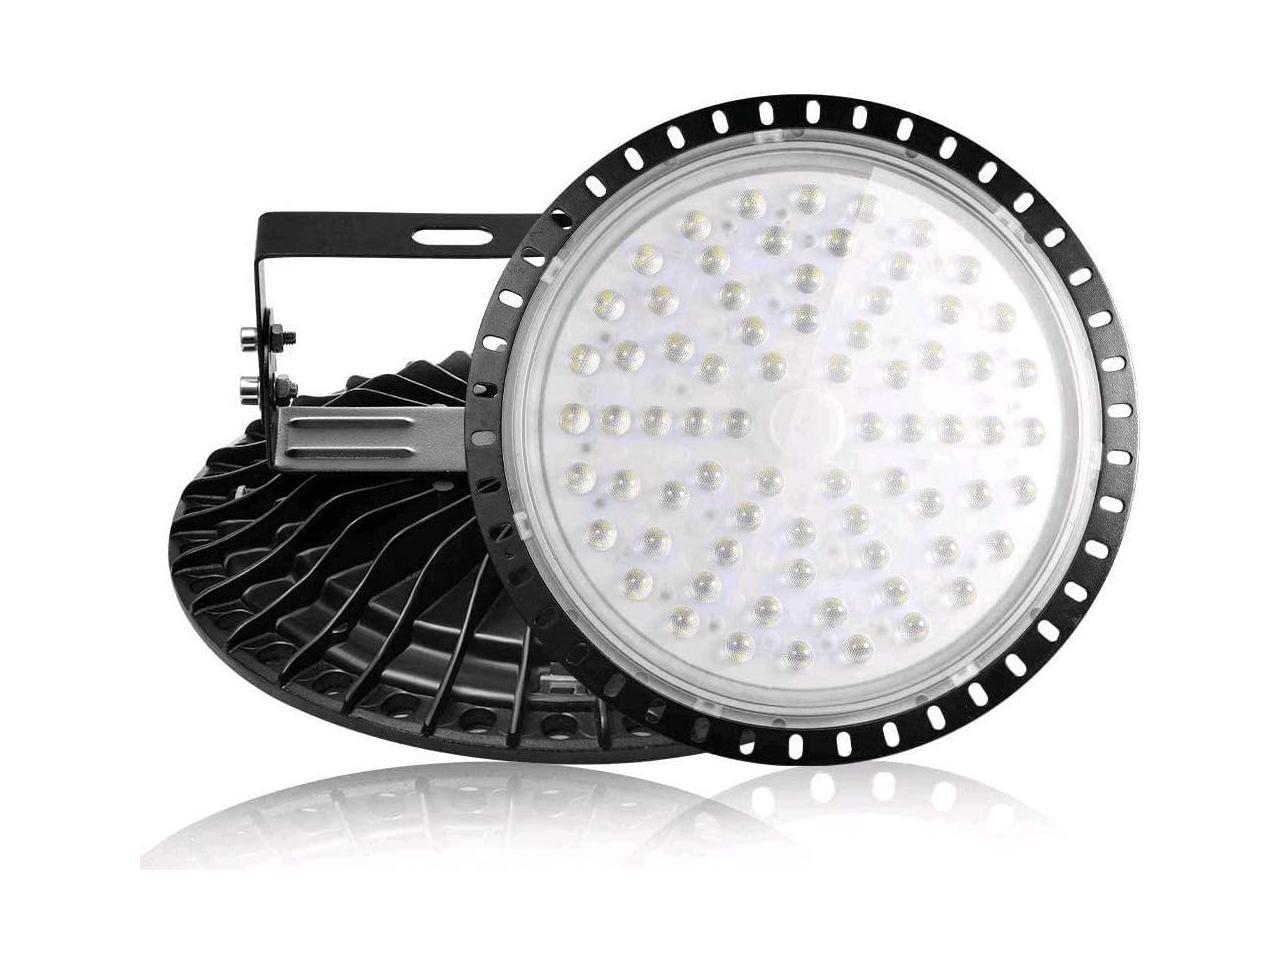 TYCOLIT 300W LED High Bay/Low Light Chain Mount Cool White Gym Workshop Lighting 